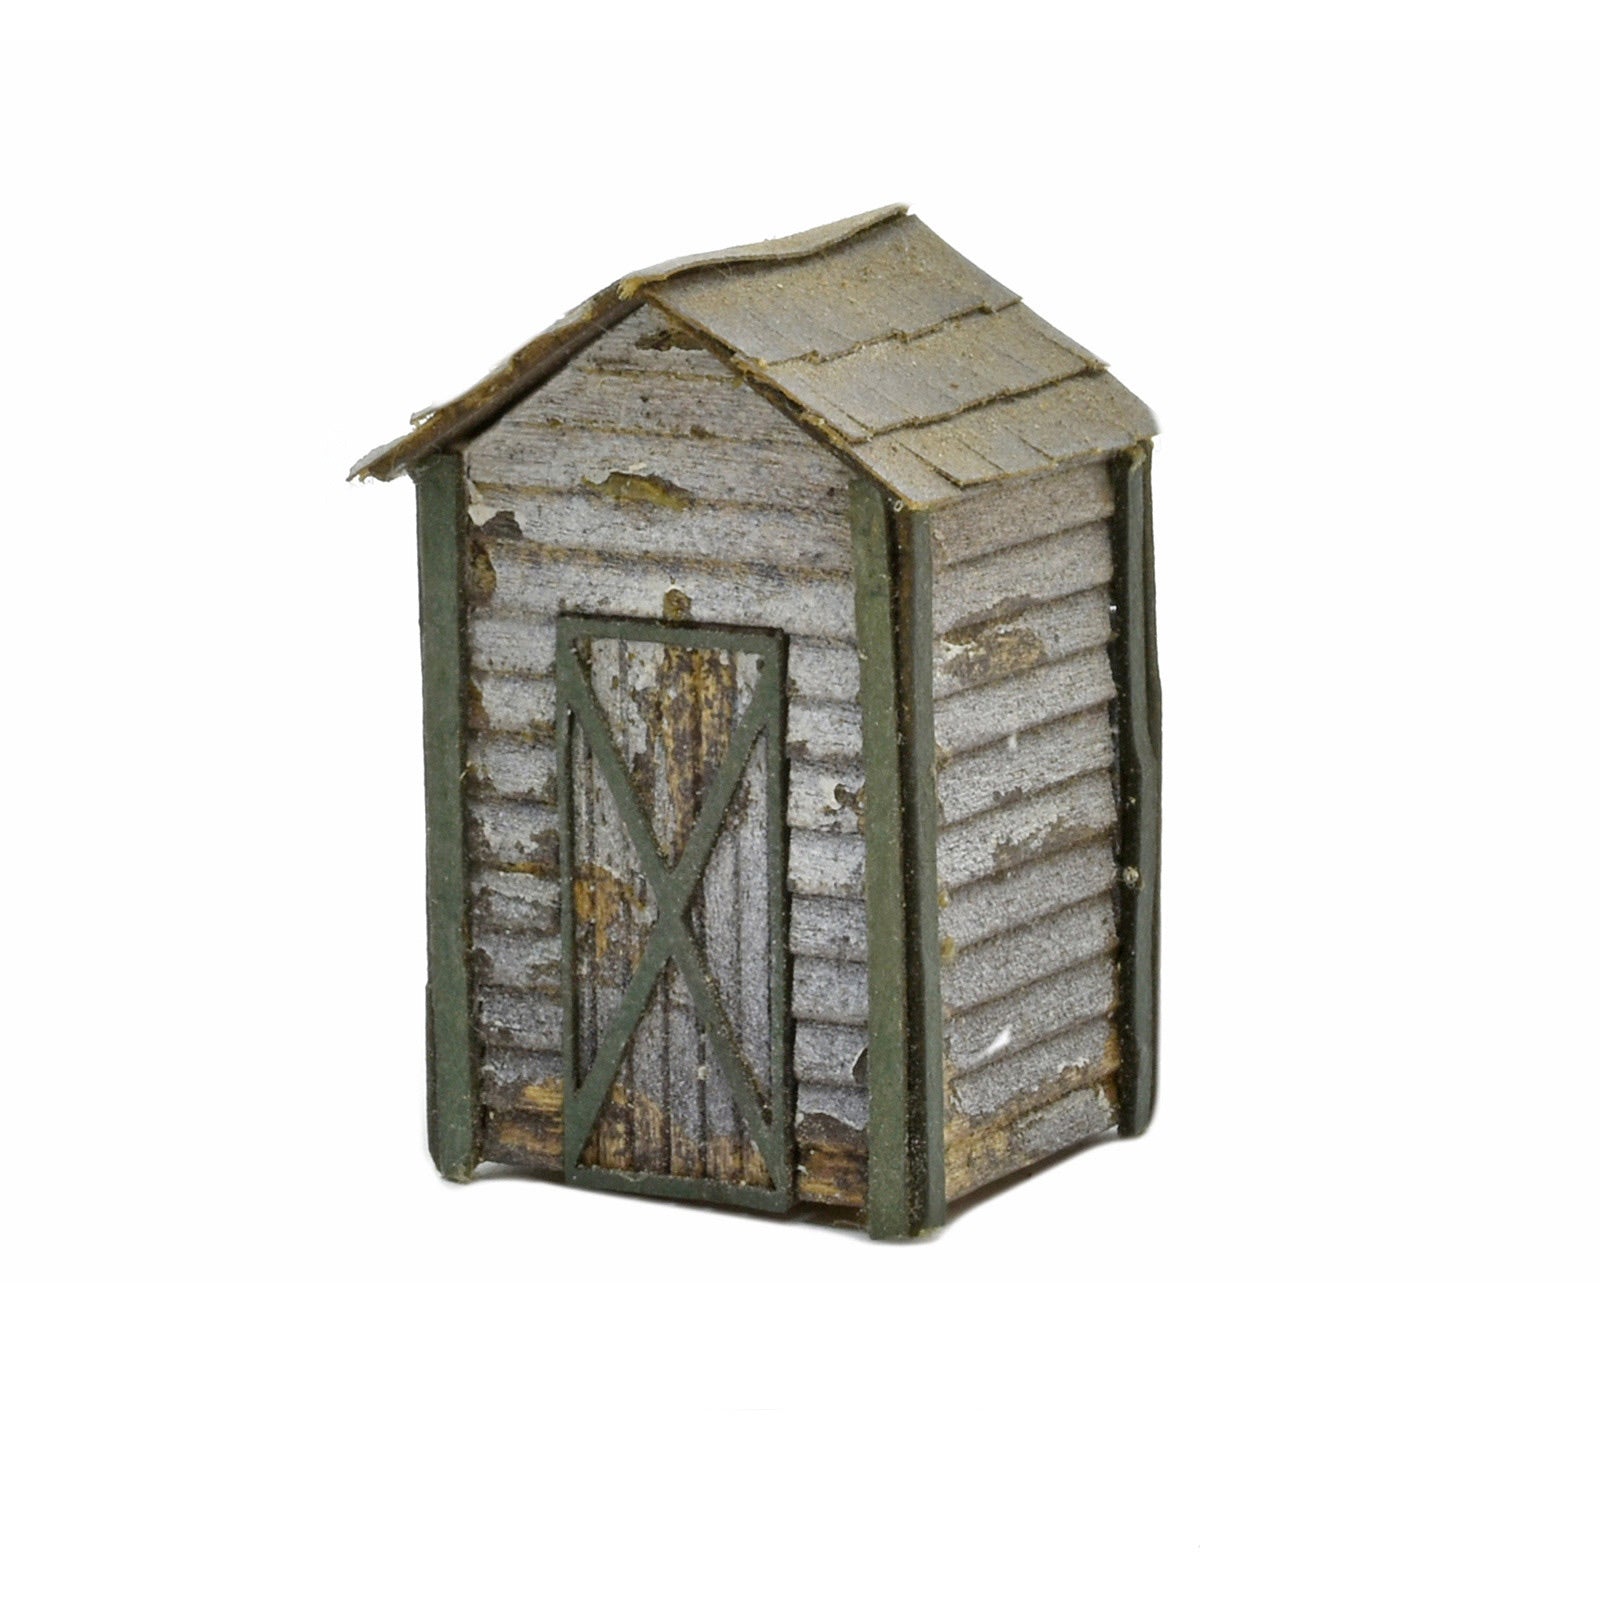 Single Occupancy Outdoor Lavatory Kit, HO Scale, By Scientific